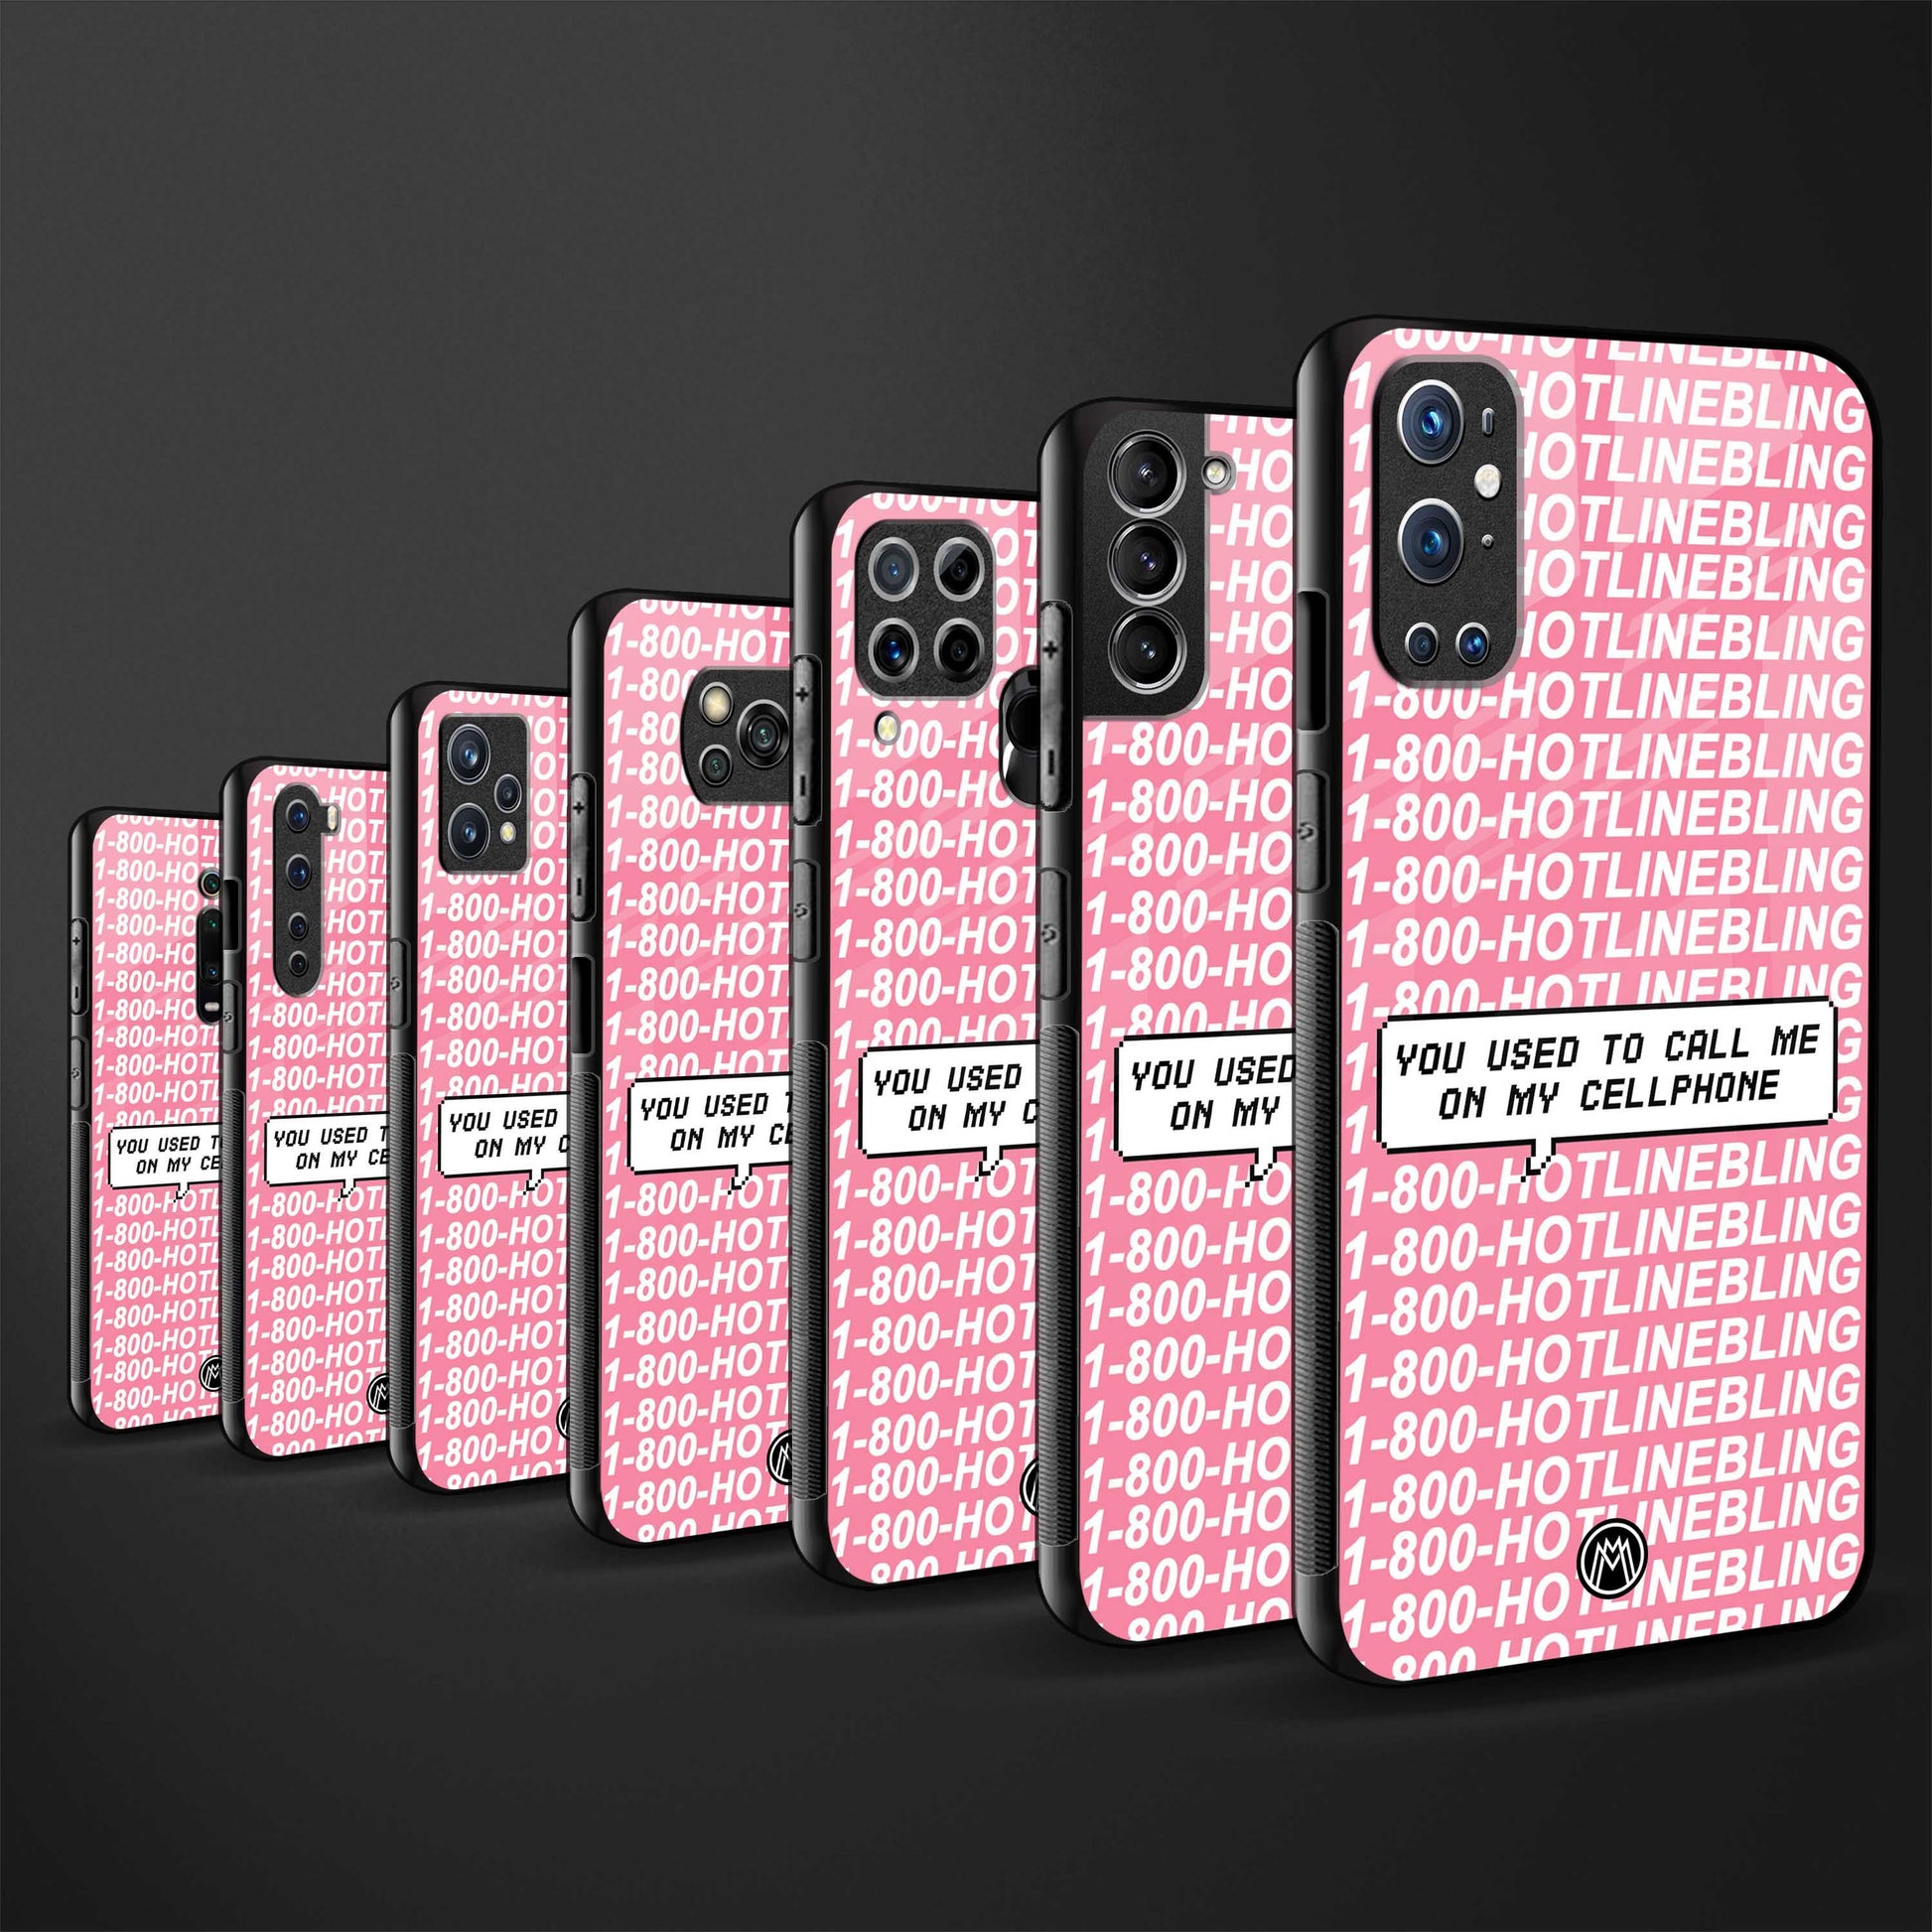 1800 hotline bling phone cover for samsung galaxy m31 